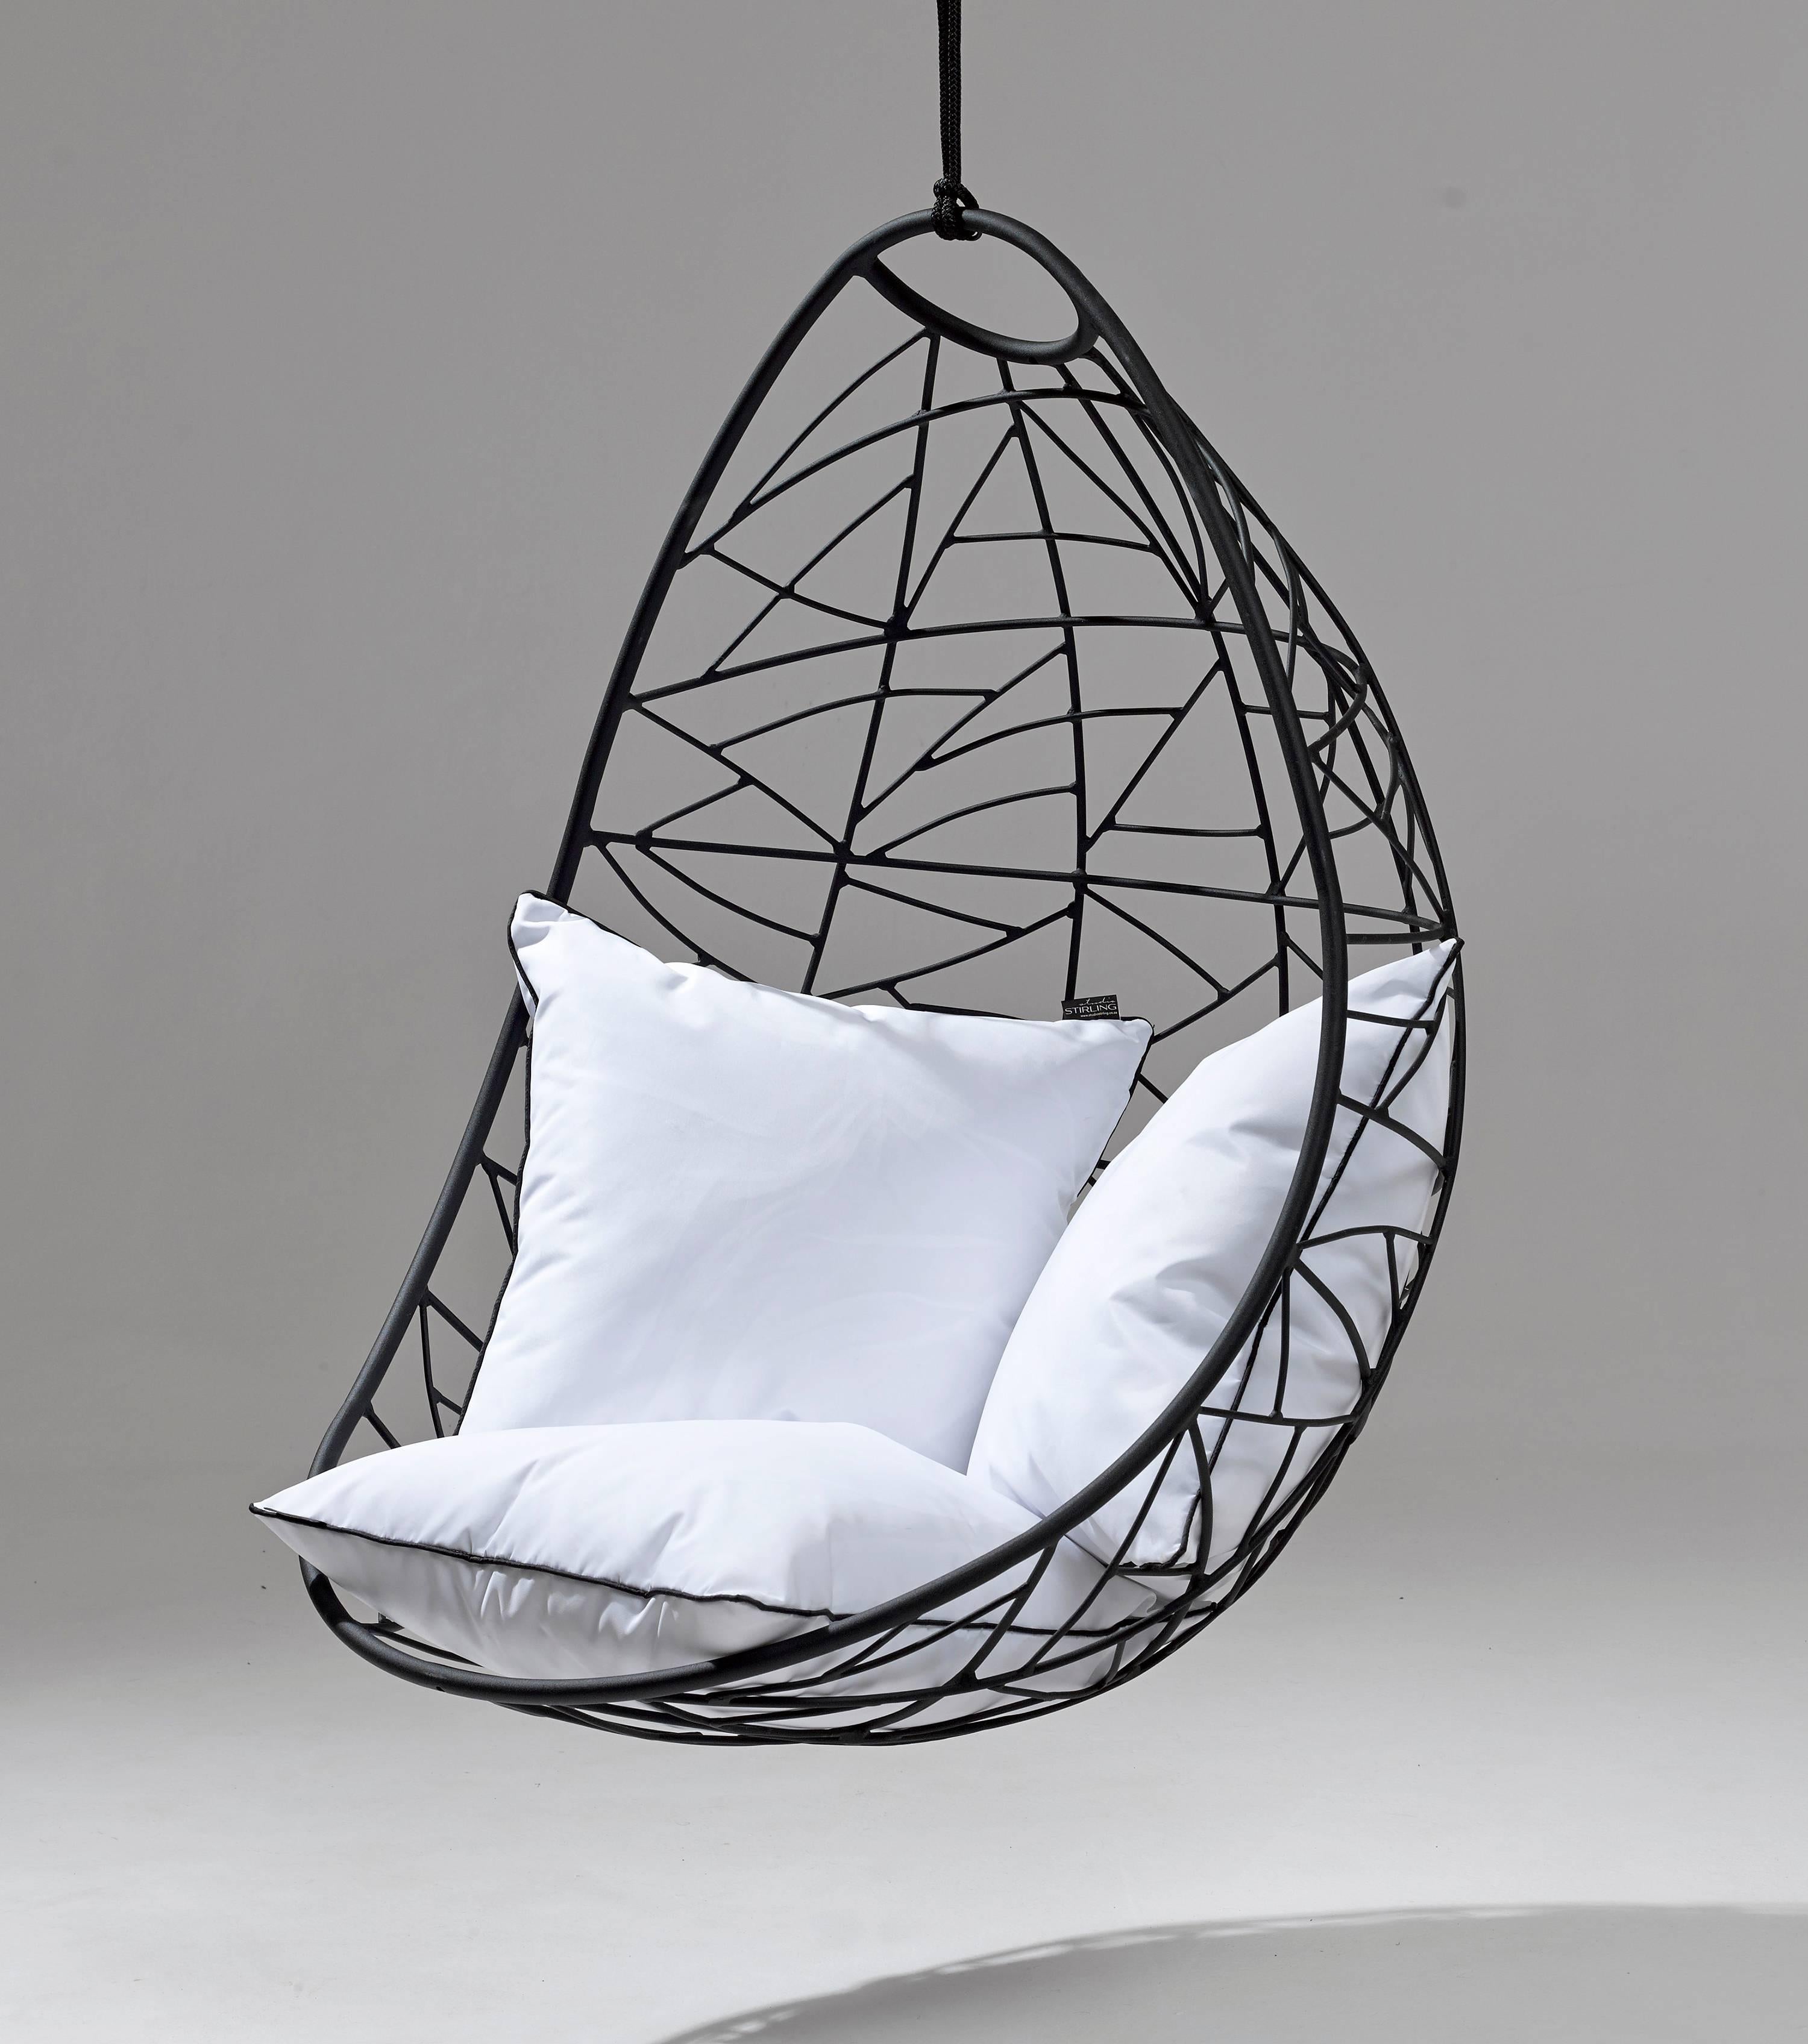 Hand-Crafted Nest Egg Hanging Swing Chair Steel Modern In/Outdoor 21st Century Black Twig For Sale